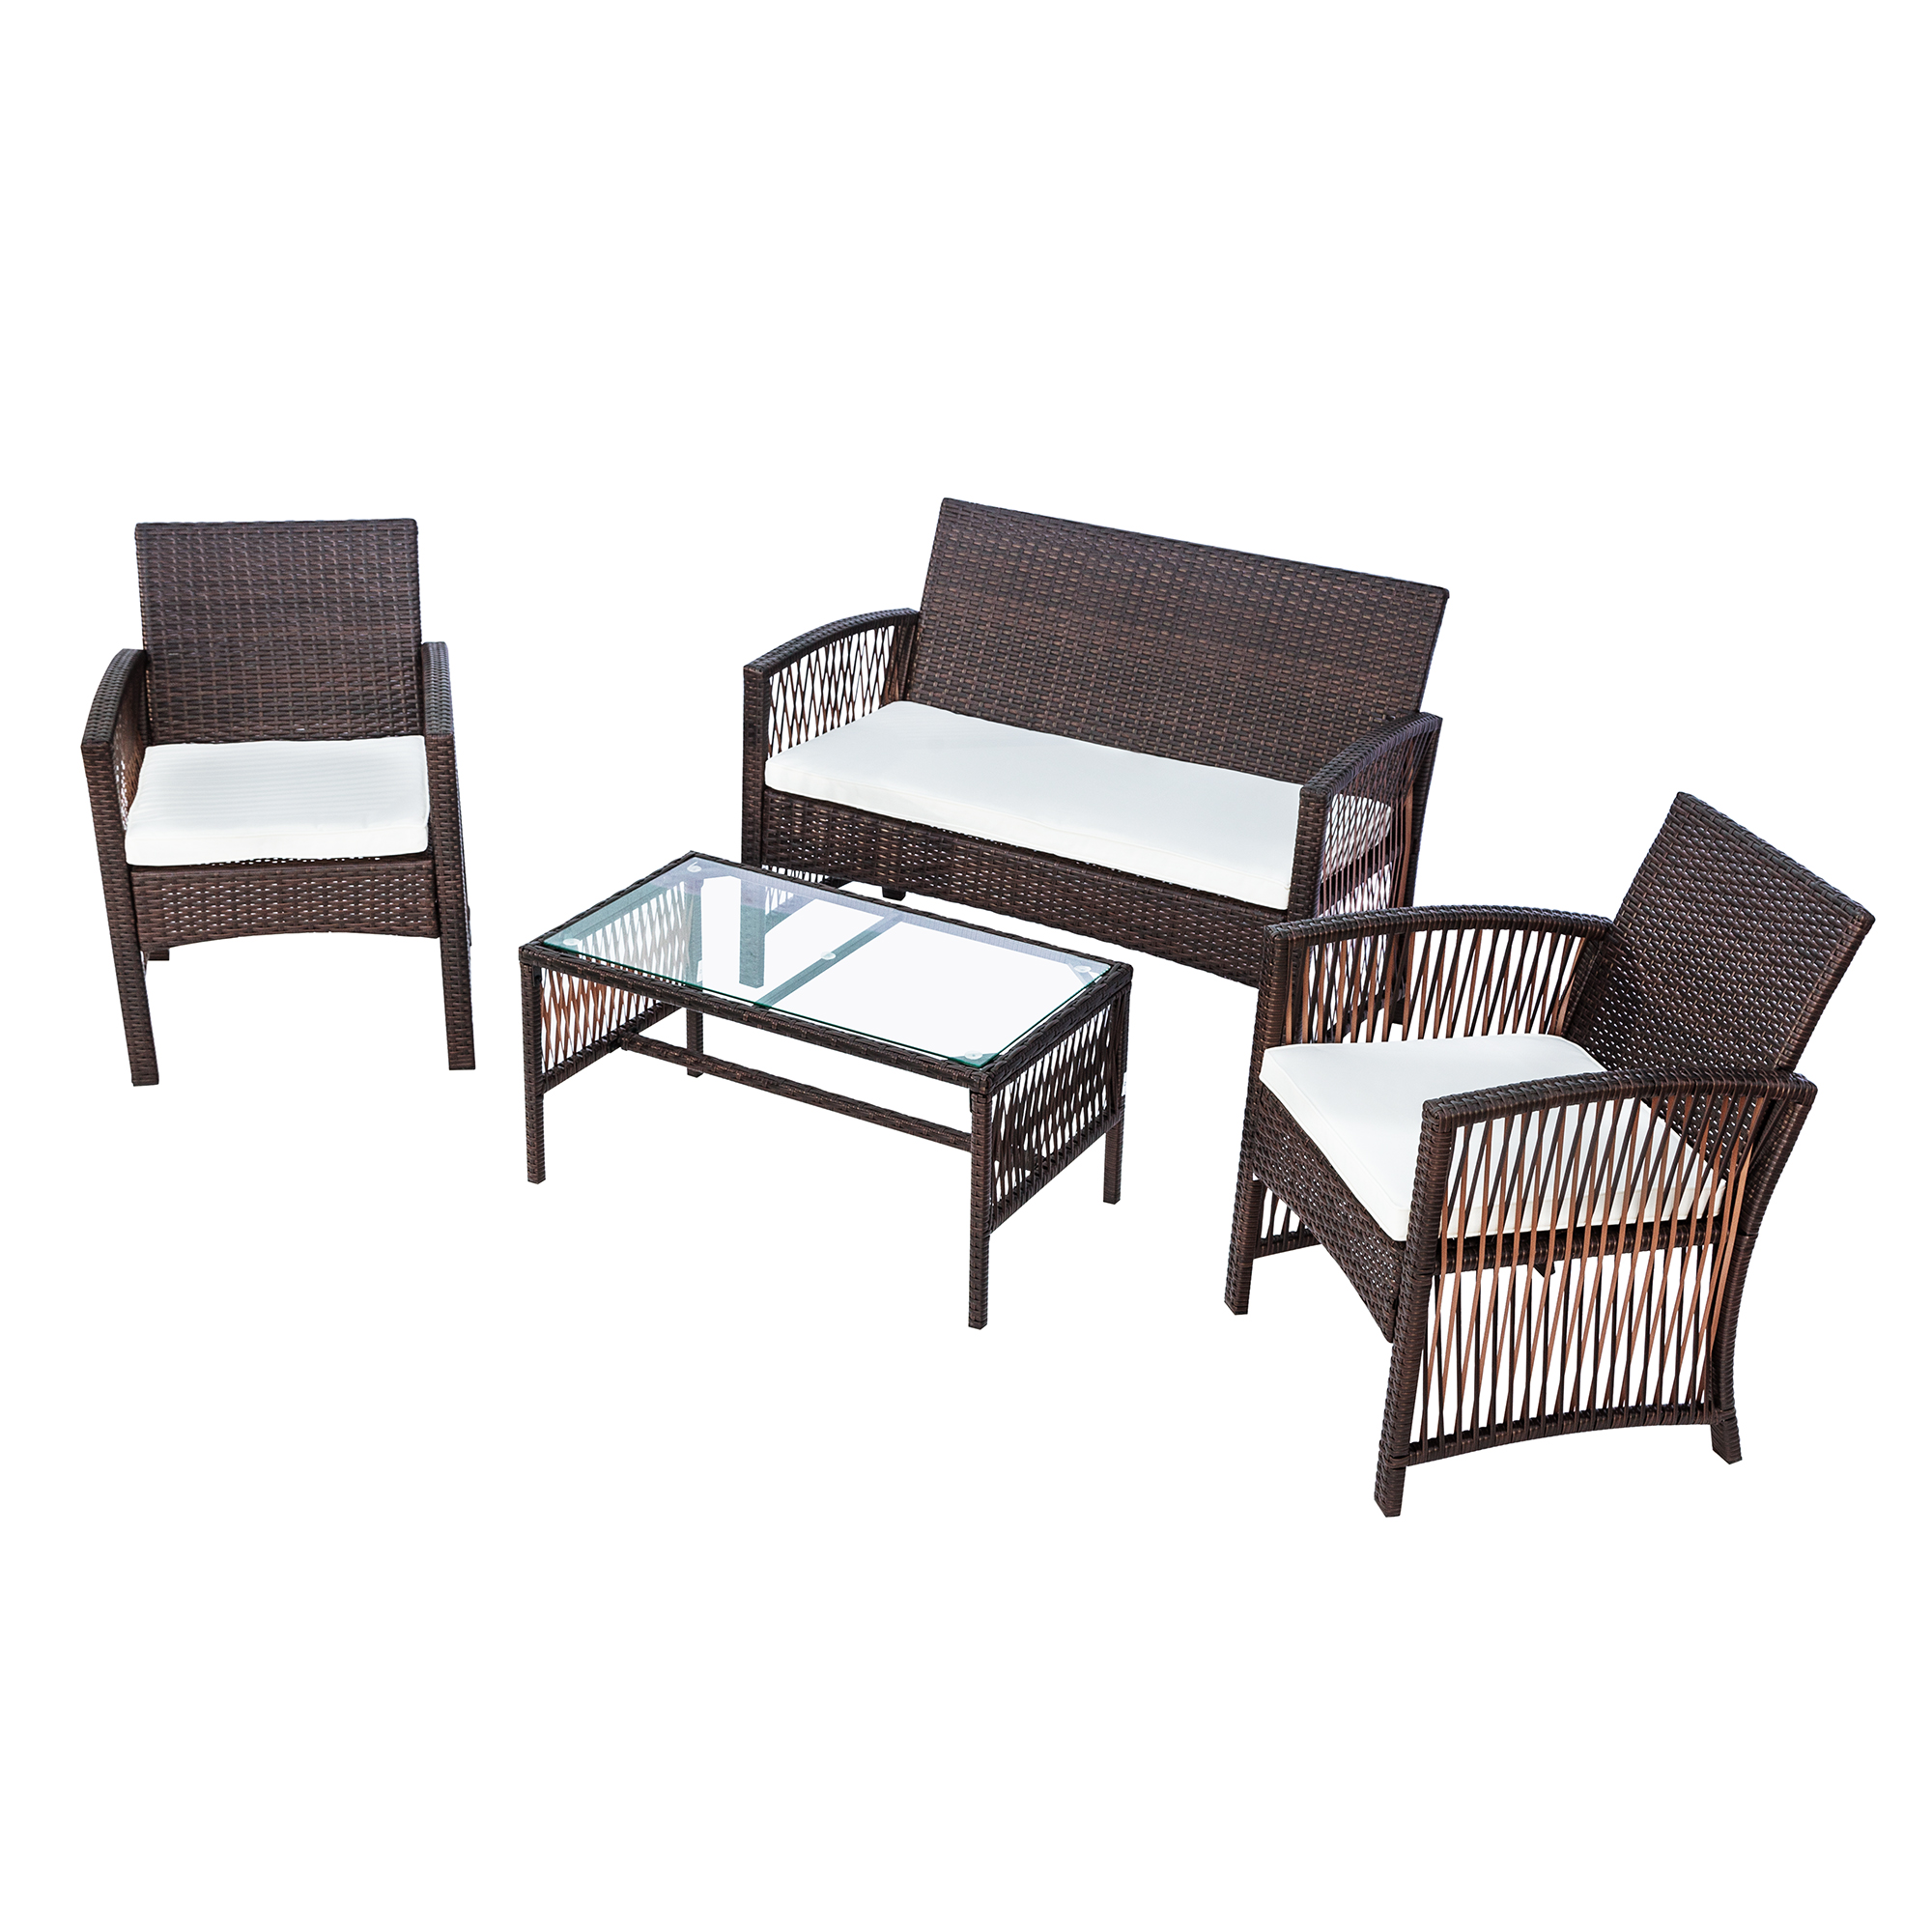 uhomepro 8-Piece Patio Bistro Set, Outdoor Furniture PE Rattan Wicker Patio Set, Porch Conversation Sets with Glass Coffee Table, Wicker Chair Set for Backyard Garden Lawn Poolside, Brown - image 5 of 12